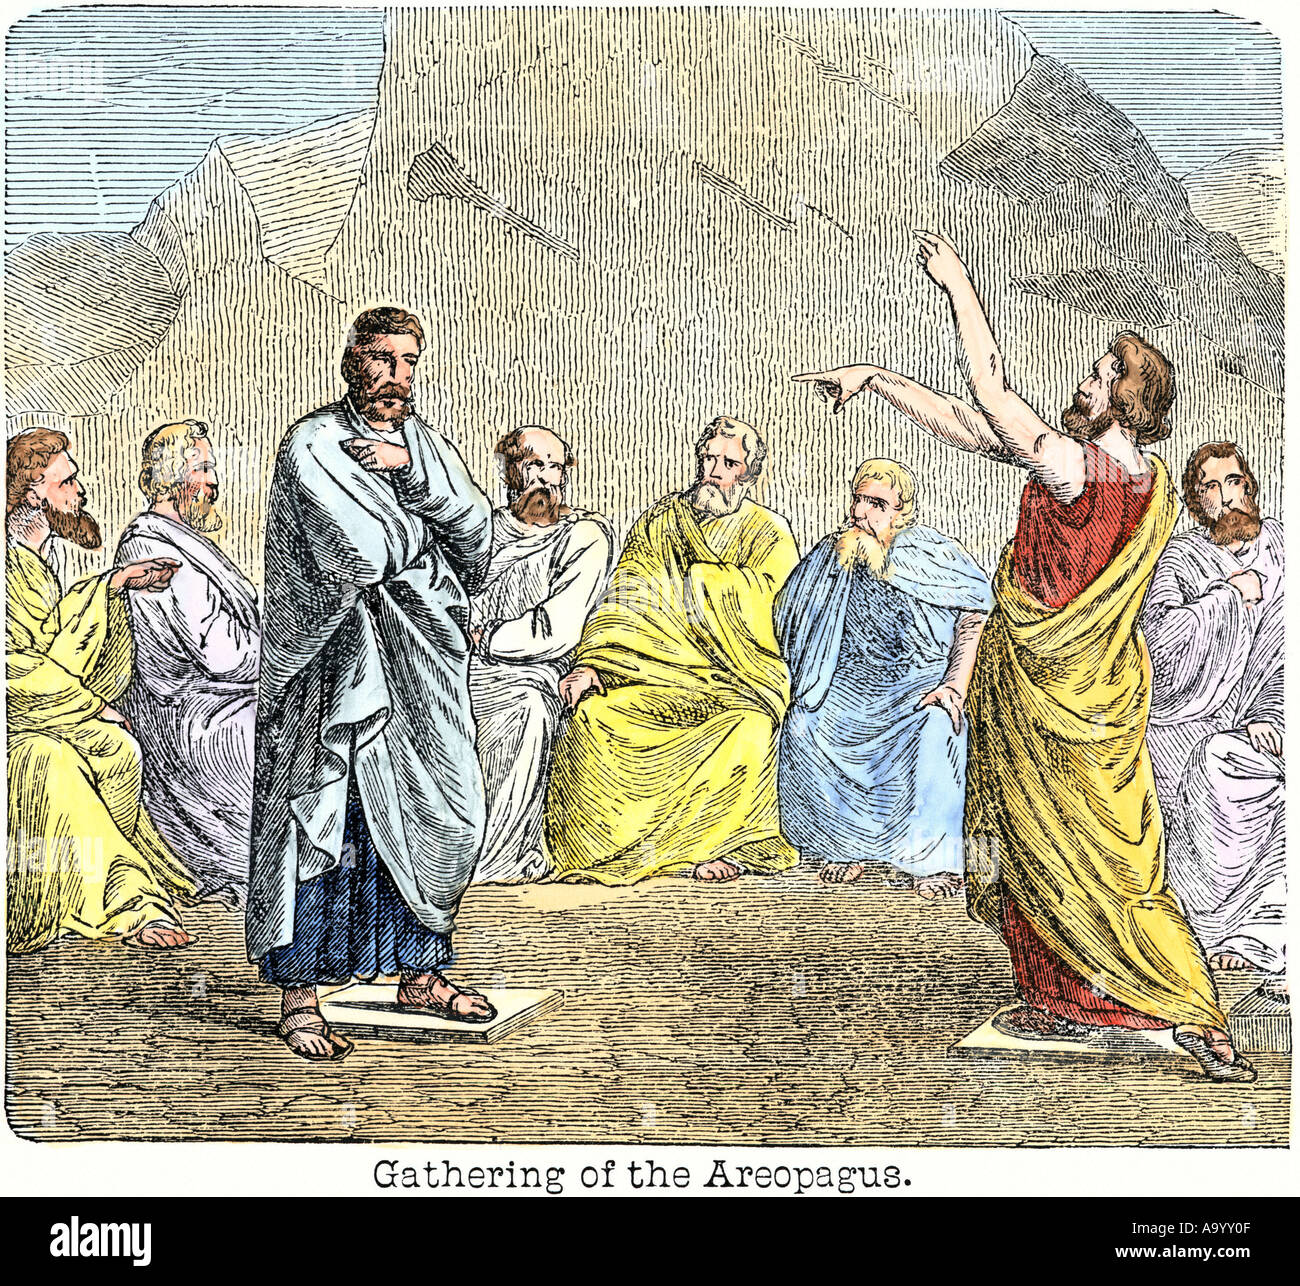 Gathering of the Areopagus a deliberative court that met in the open air ancient Athens. Hand-colored woodcut Stock Photo